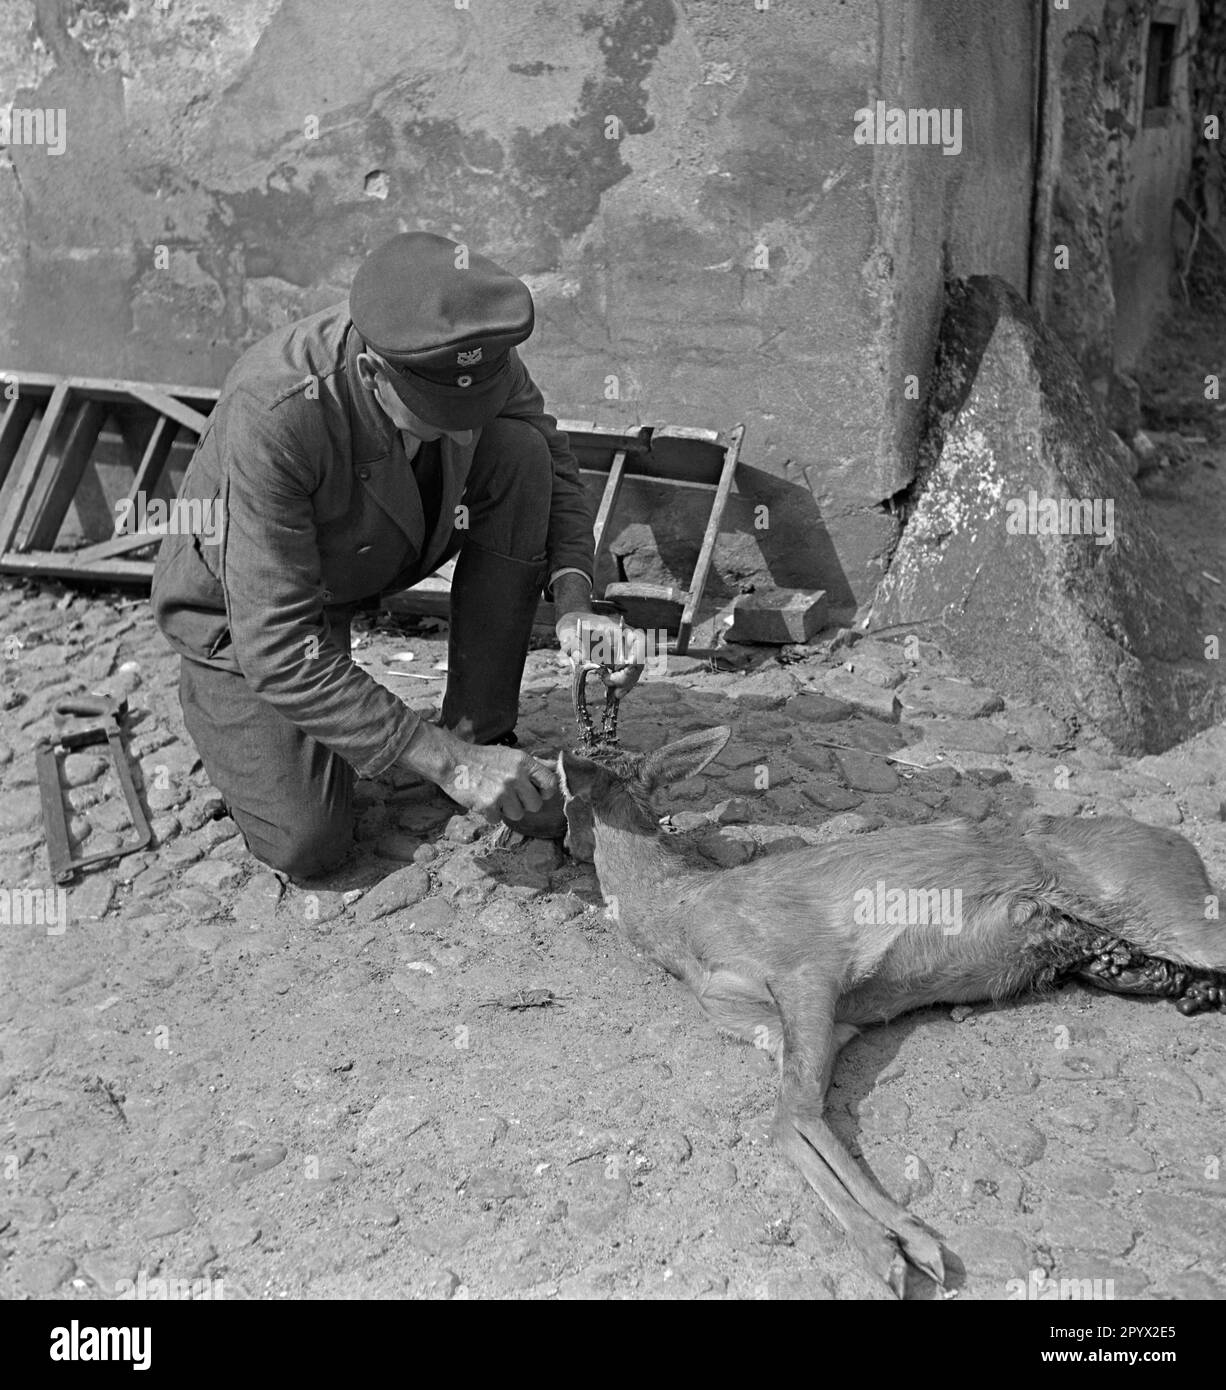 An employee of an estate scrapes the antlers of a roebuck to saw it off. Undated photo, probably on a farm in the province of Pomerania in the 1930s. Stock Photo